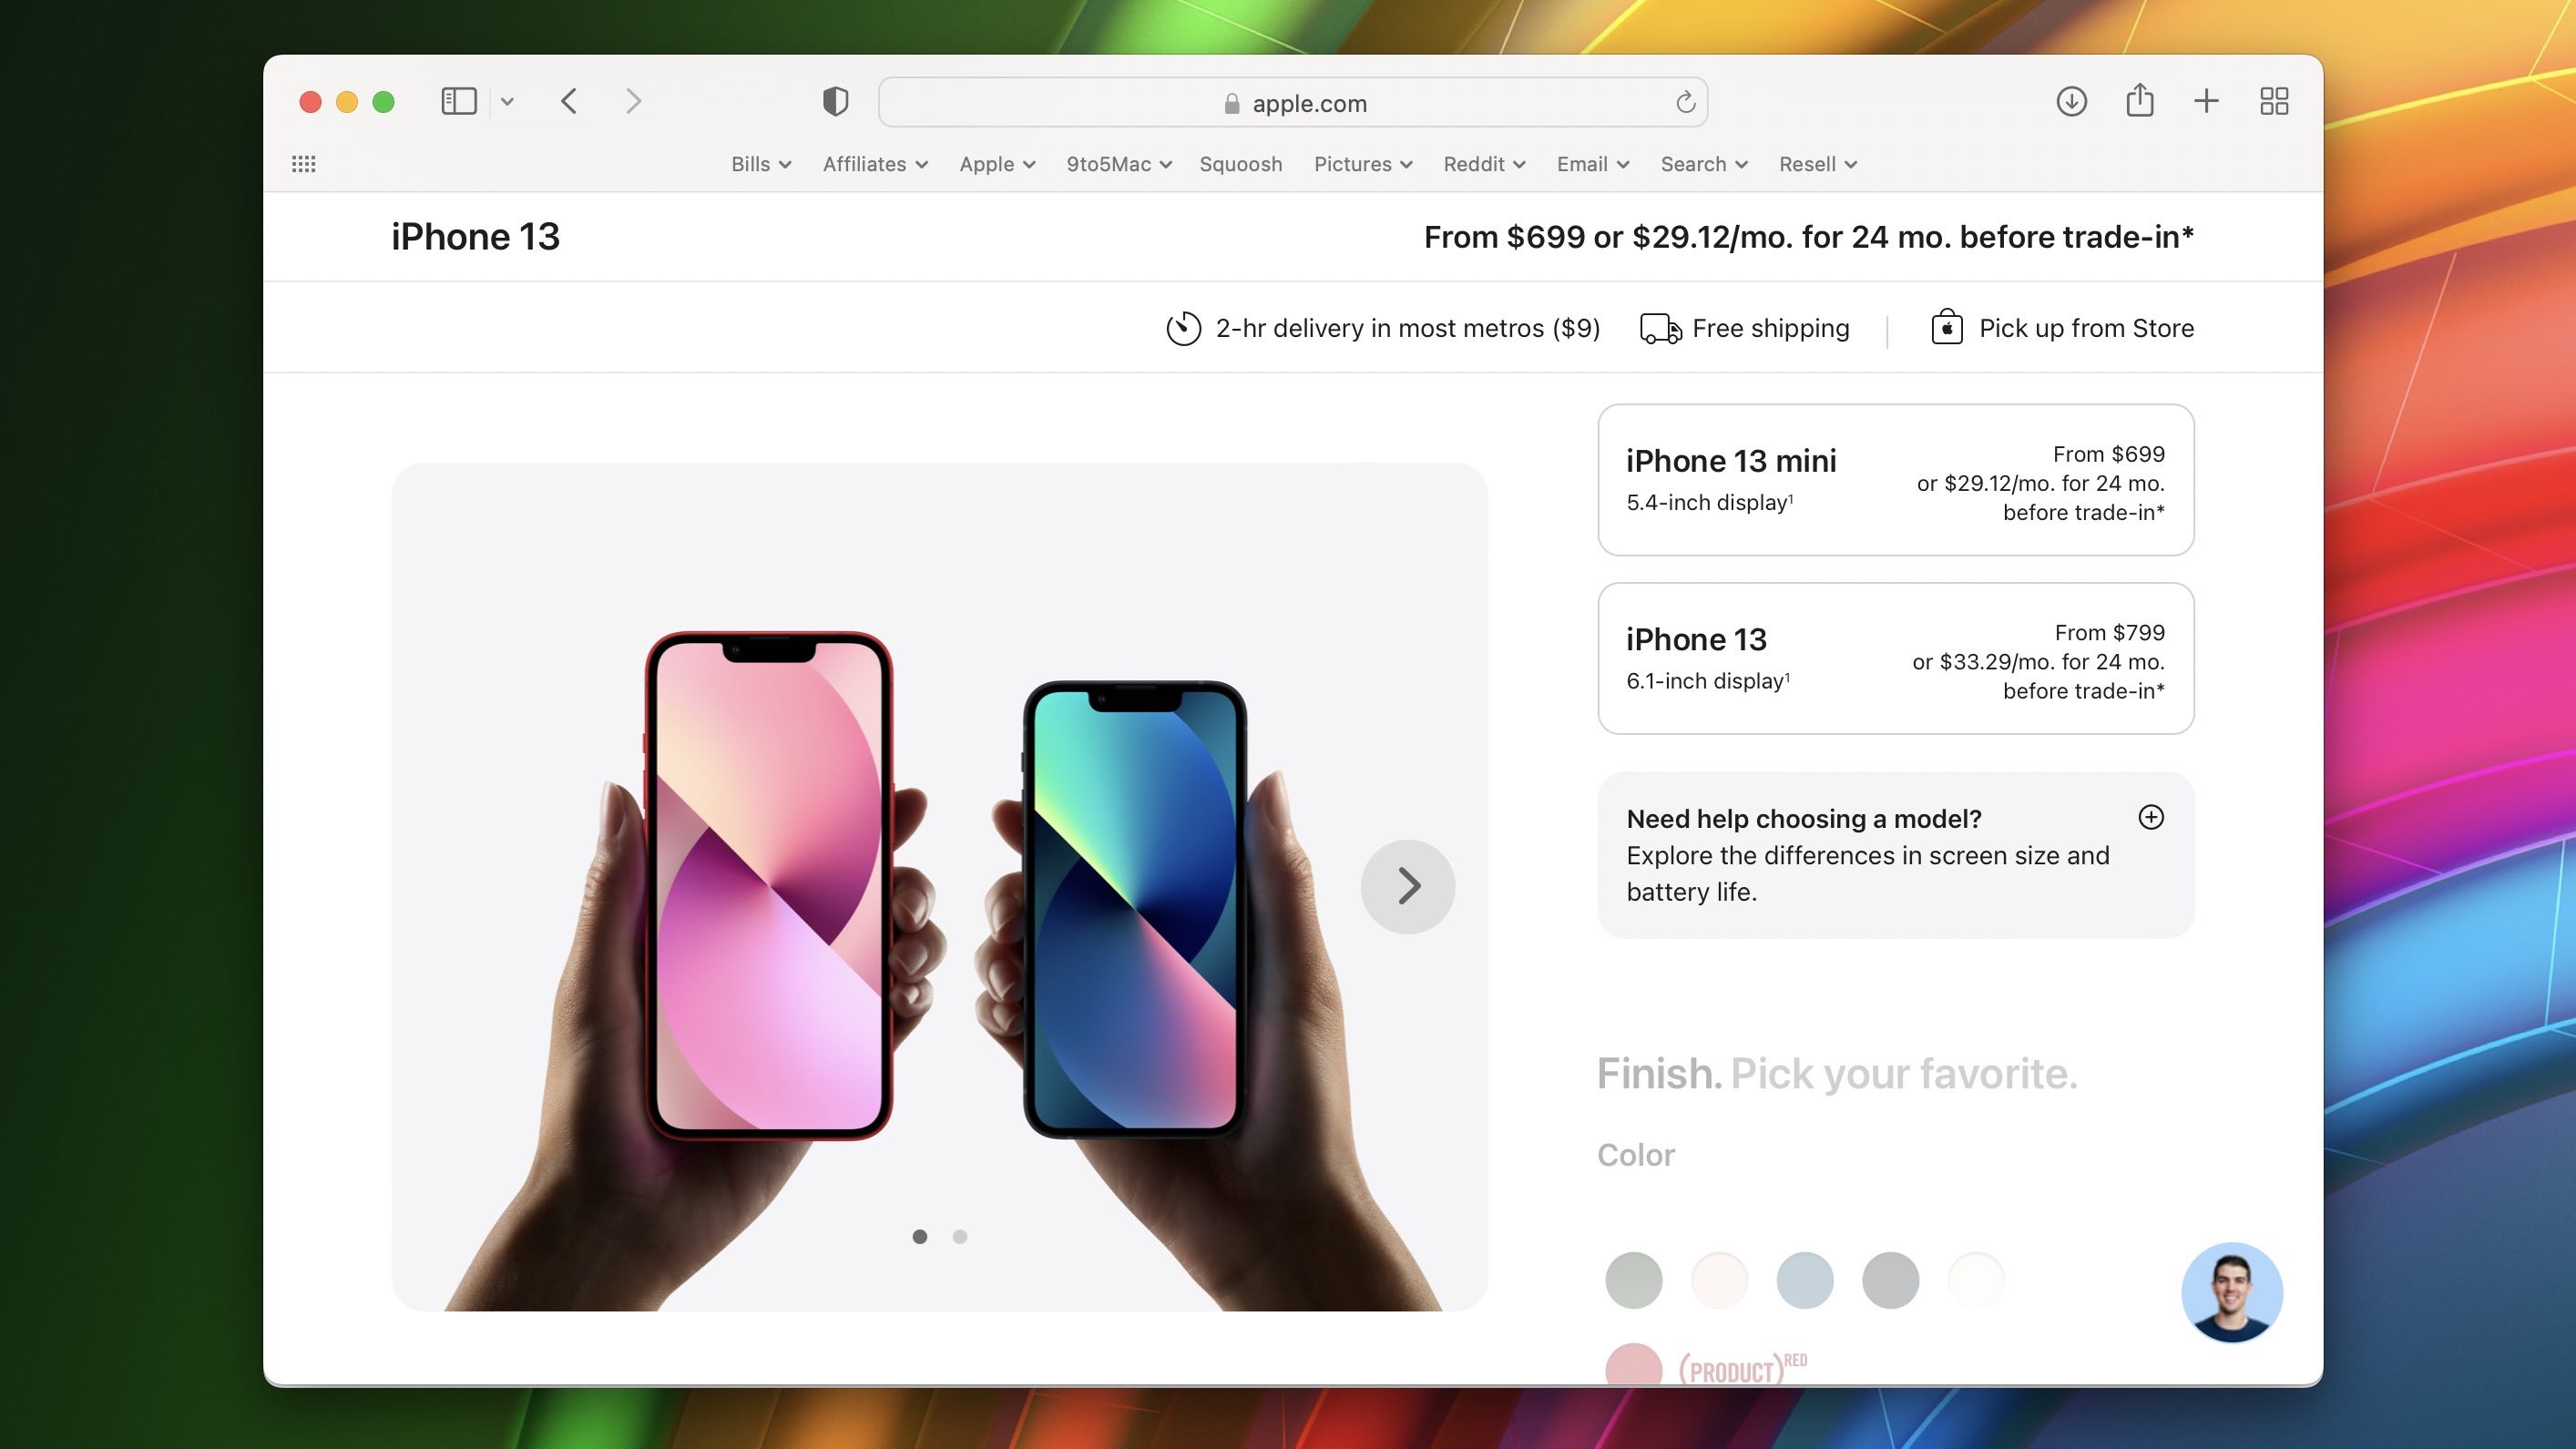 Apple Overhauls Iphone Checkout Experience With Larger Images Focus On Trade Ins More 9to5mac